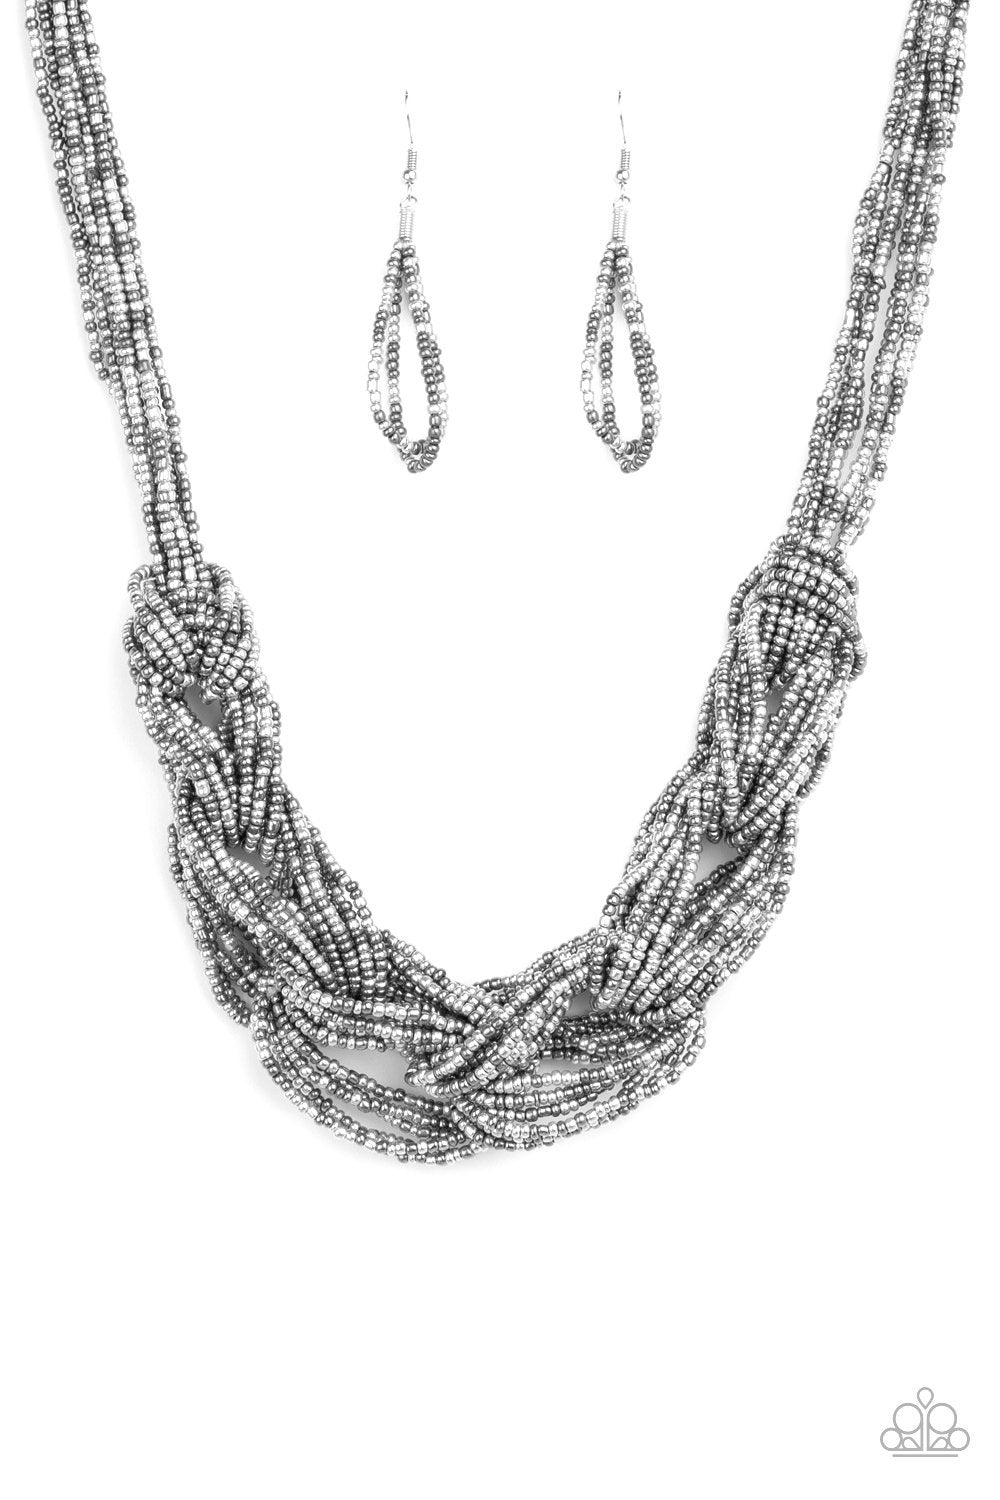 City Catwalk Silver and Gunmetal Seed Bead Necklace - Paparazzi Accessories-CarasShop.com - $5 Jewelry by Cara Jewels